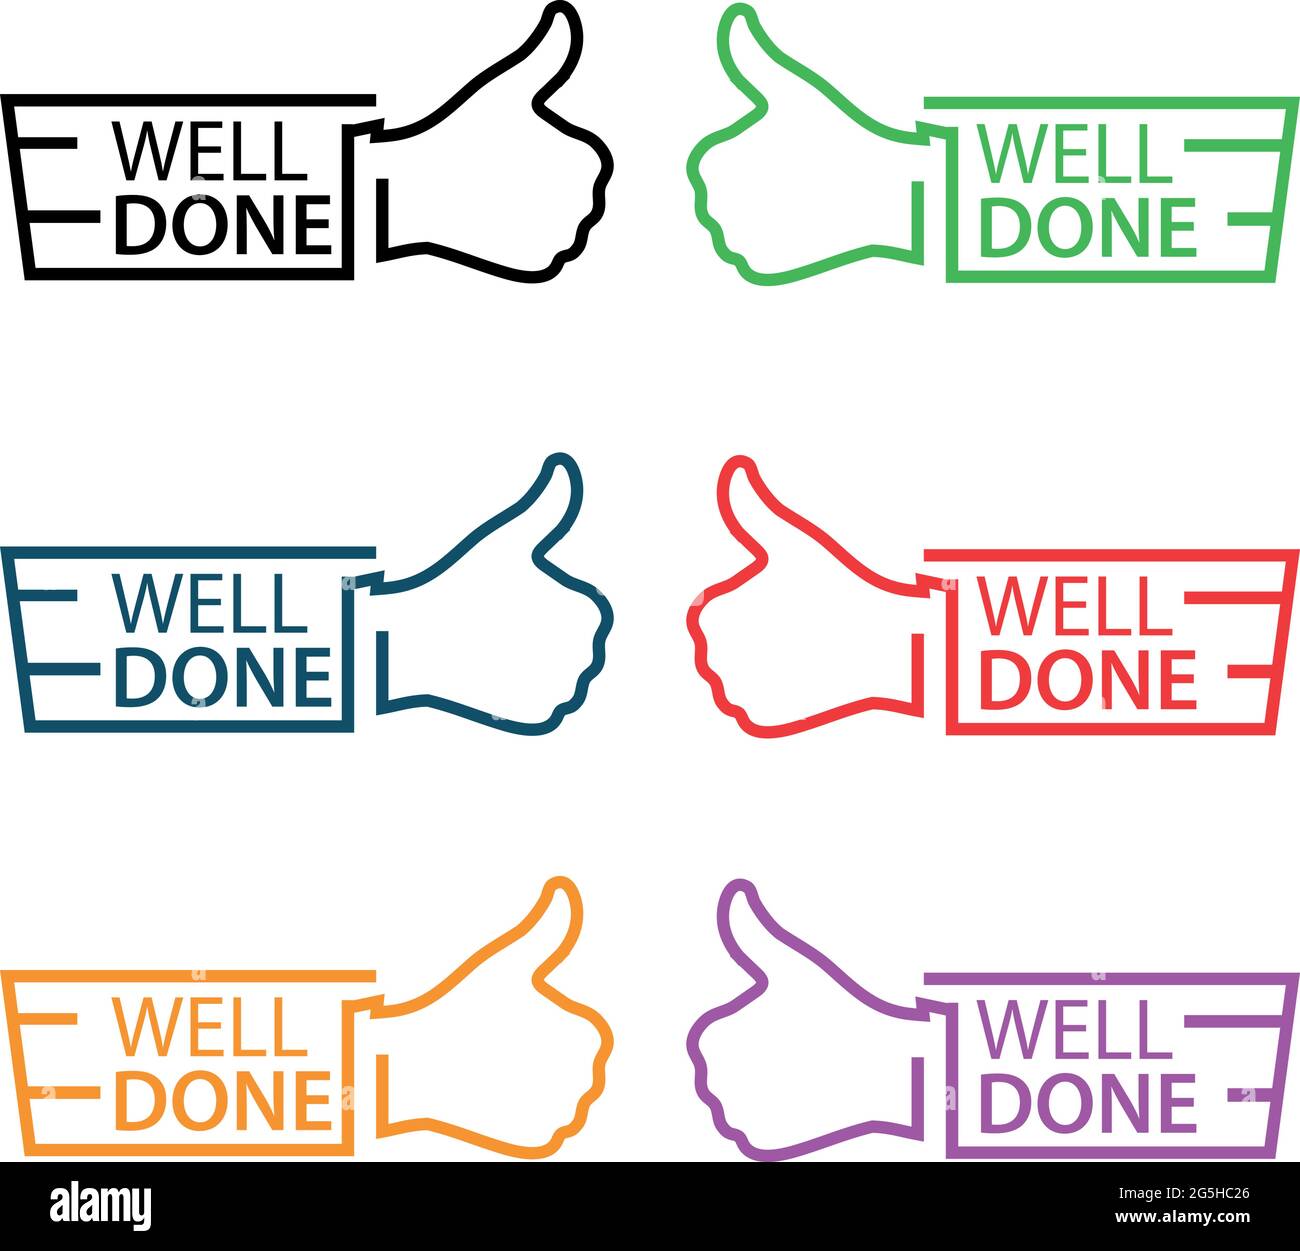 Well done with thumb. Flat vector illustration on white background. Stock Vector